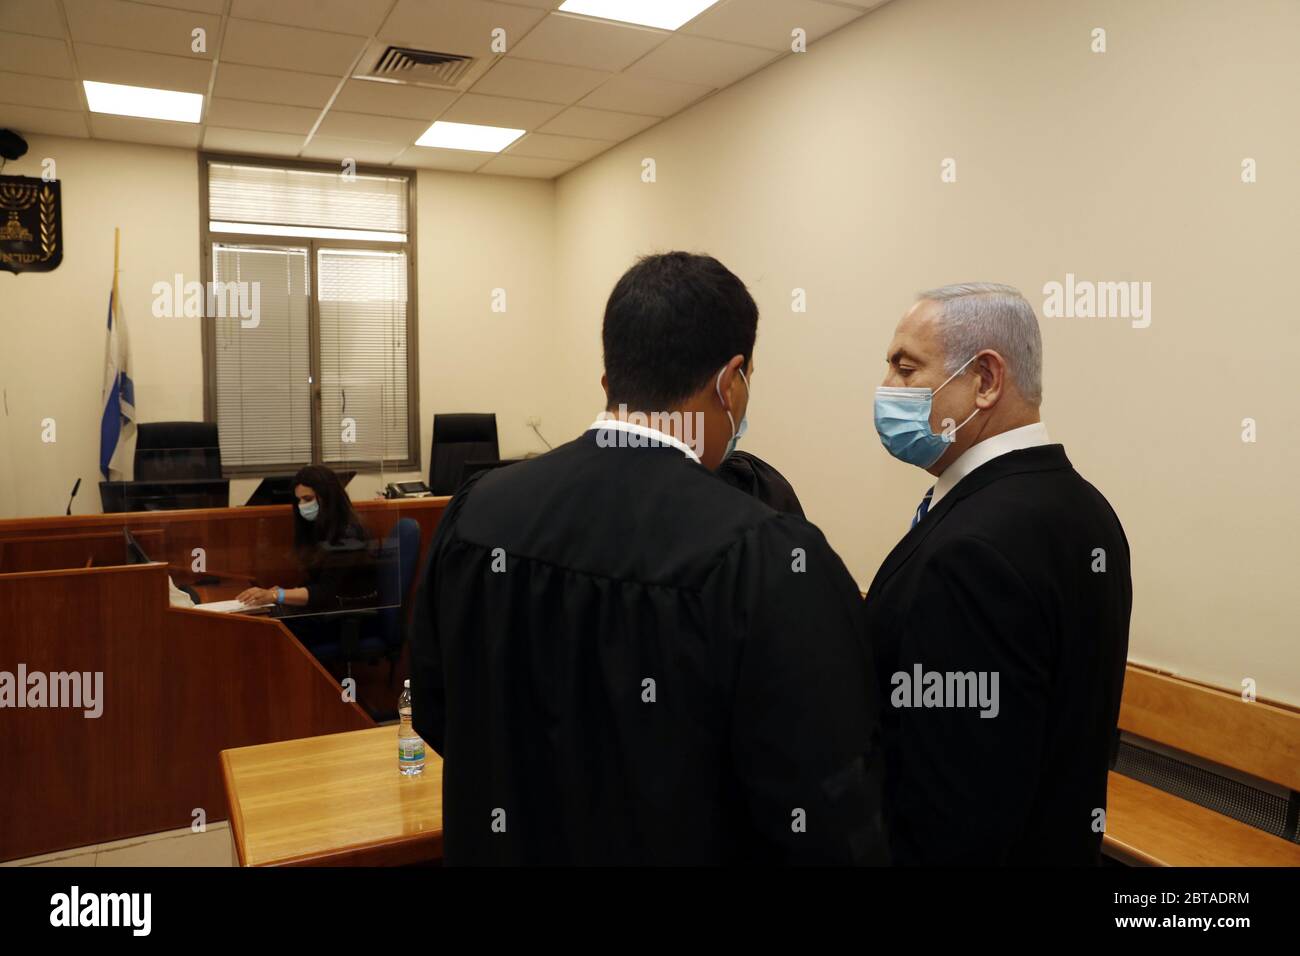 Jerusalem, Israel. 24th May, 2020. Israeli Prime Minister Benjamin Netanyahu, wearing a face mask, looks on while standing inside the court room as his corruption trial opens at the Jerusalem District Court on Sunday, May 24, 2020. Netanyahu attacked the Israeli justice system as he became the first sitting prime minister to go on trial. Pool Photo by Ronen Zvulun/UPI Credit: UPI/Alamy Live News Stock Photo